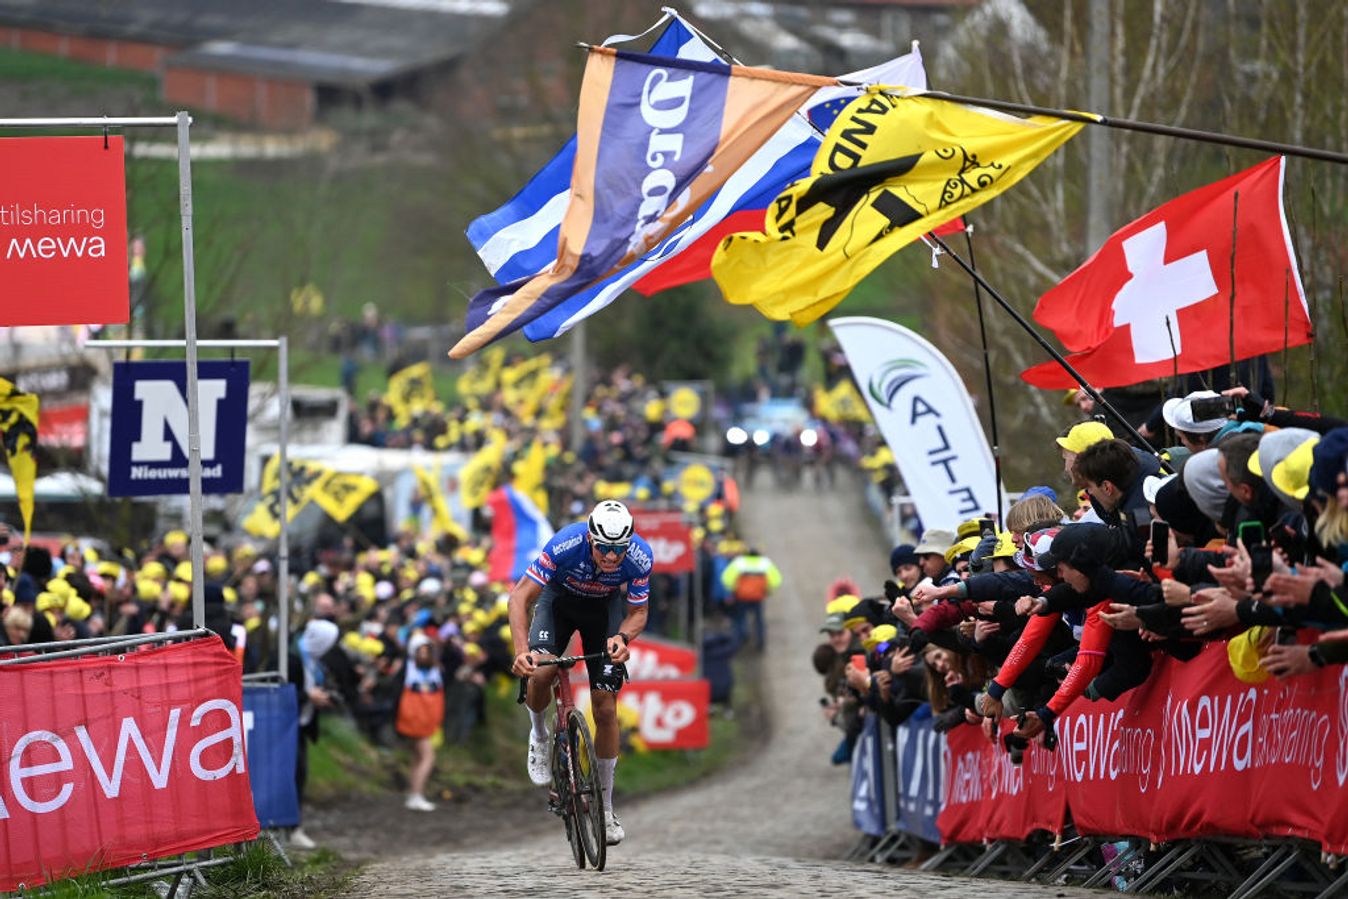 Mathieu van der Poel climbs the Paterberg in the 2023 Tour of Flanders